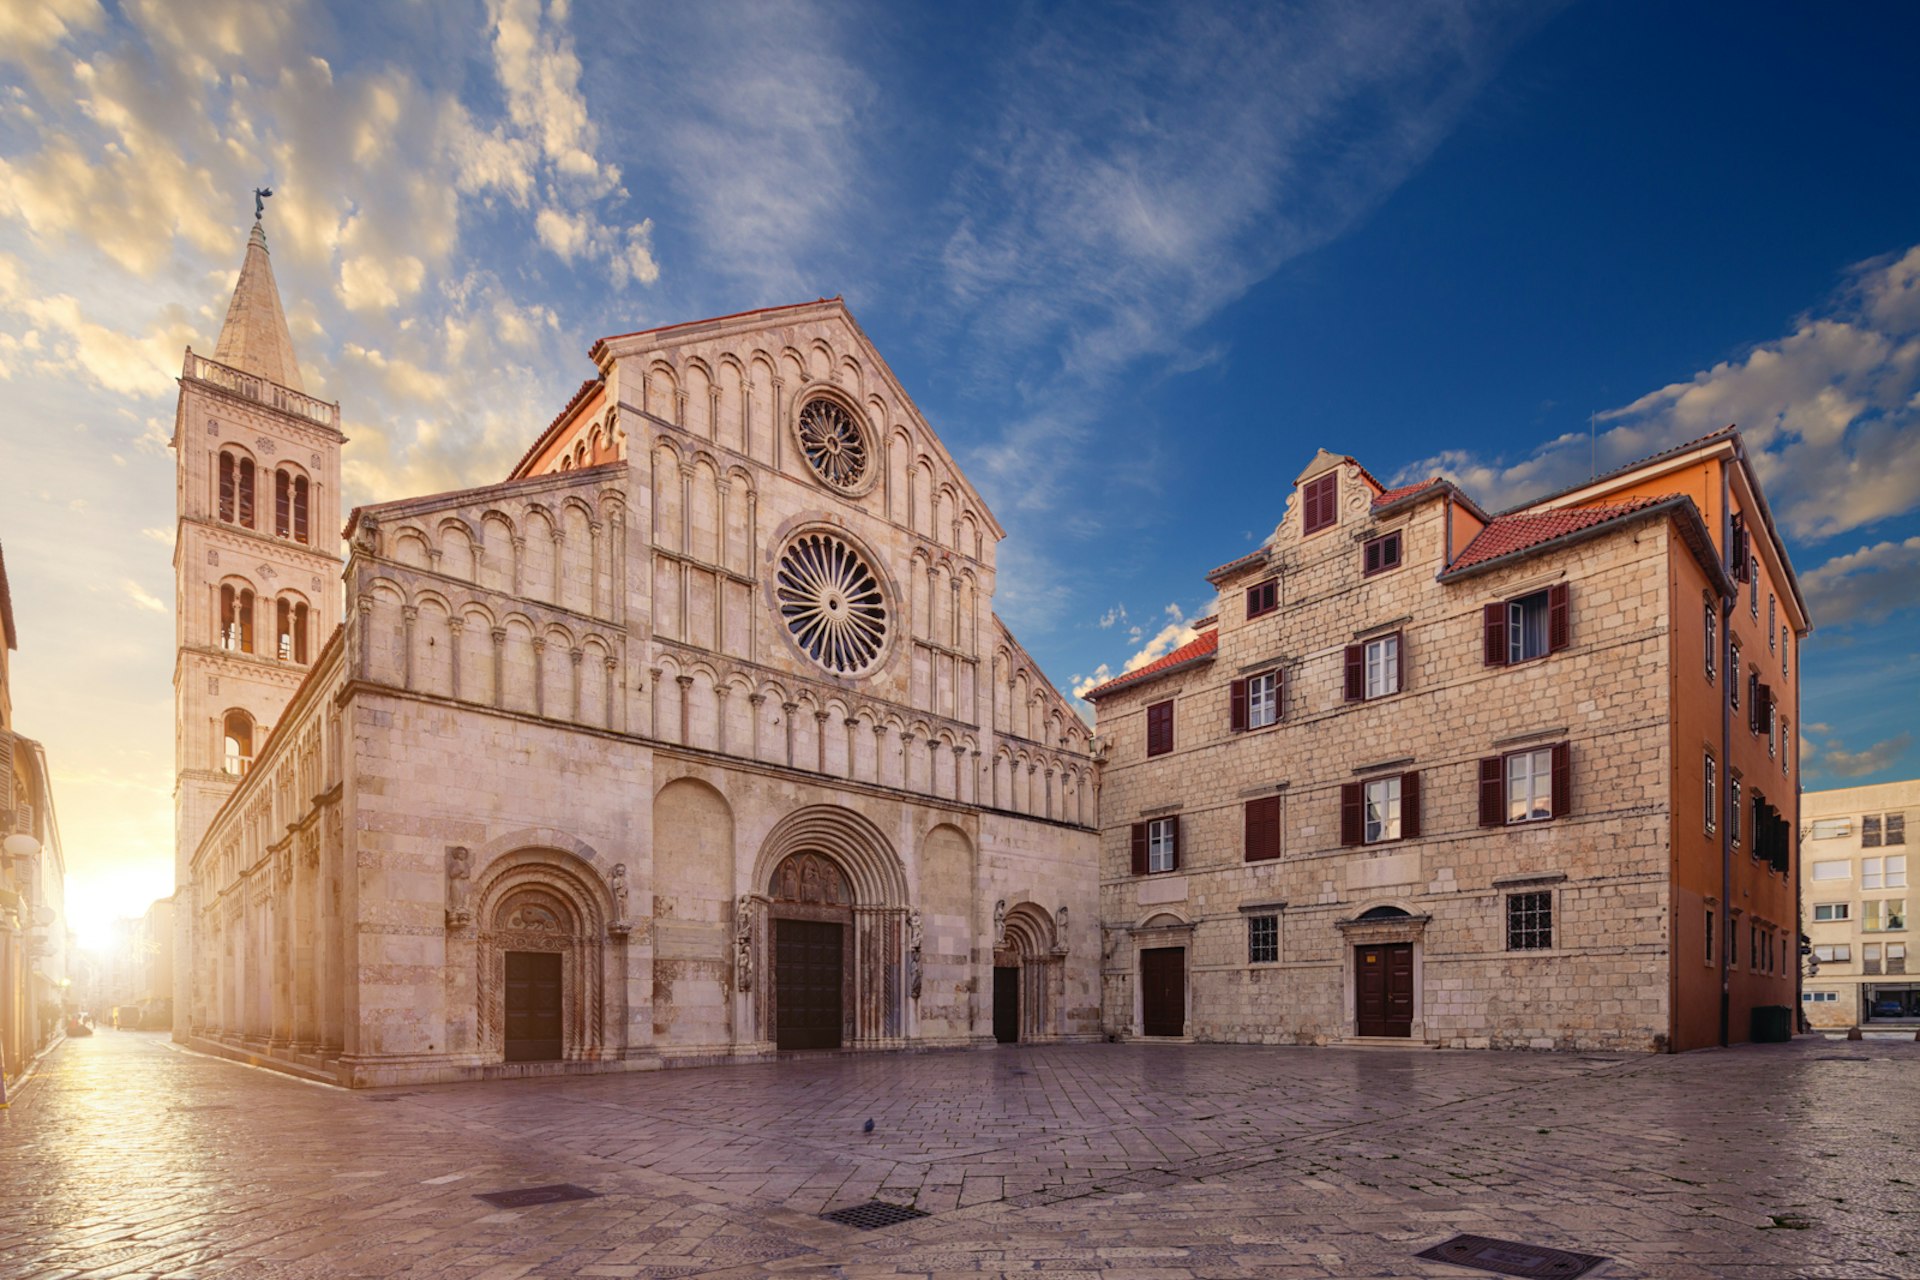 The facade of St Anastasia's Cathedral in Zadar